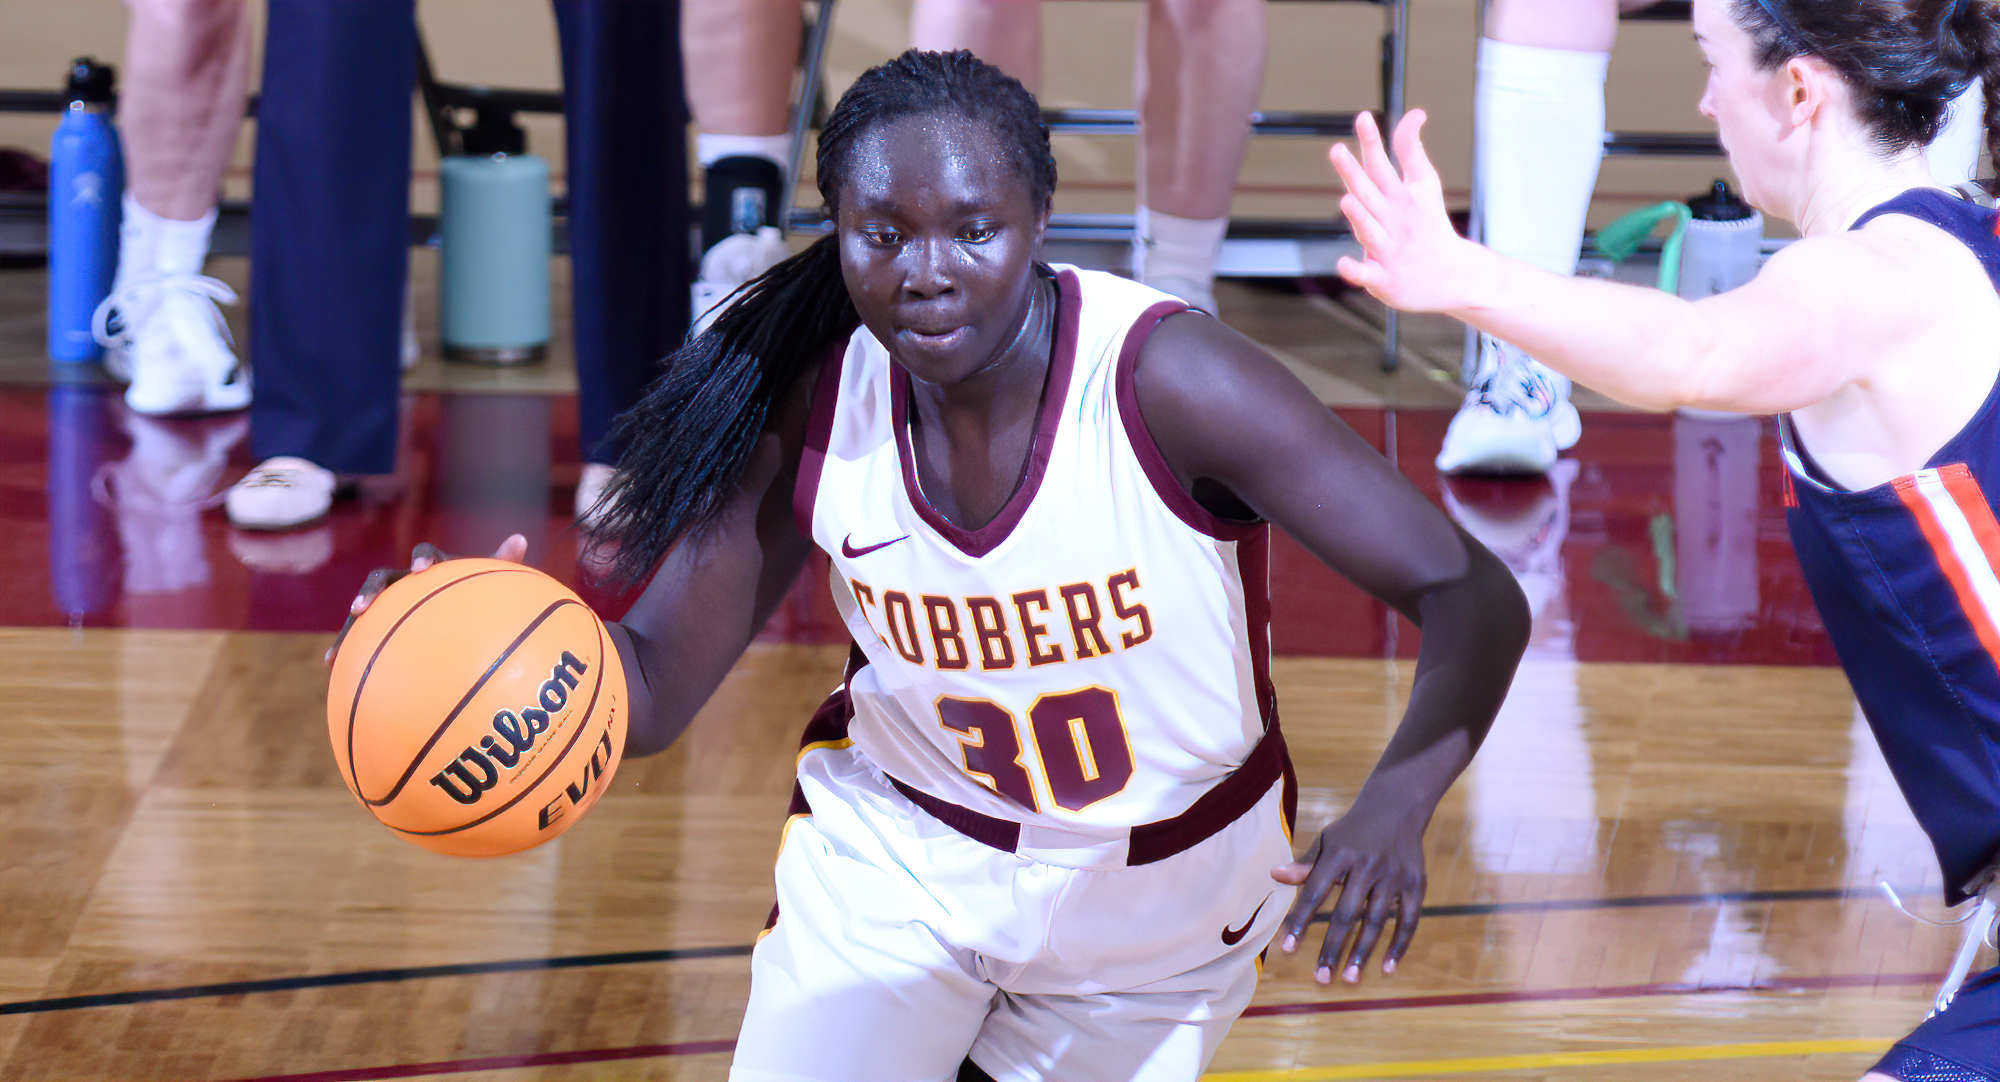 Senior Mary Sem had a team-high 18 points, and also grabbed four rebounds, in the Cobbers' game at Wis.-River Falls.